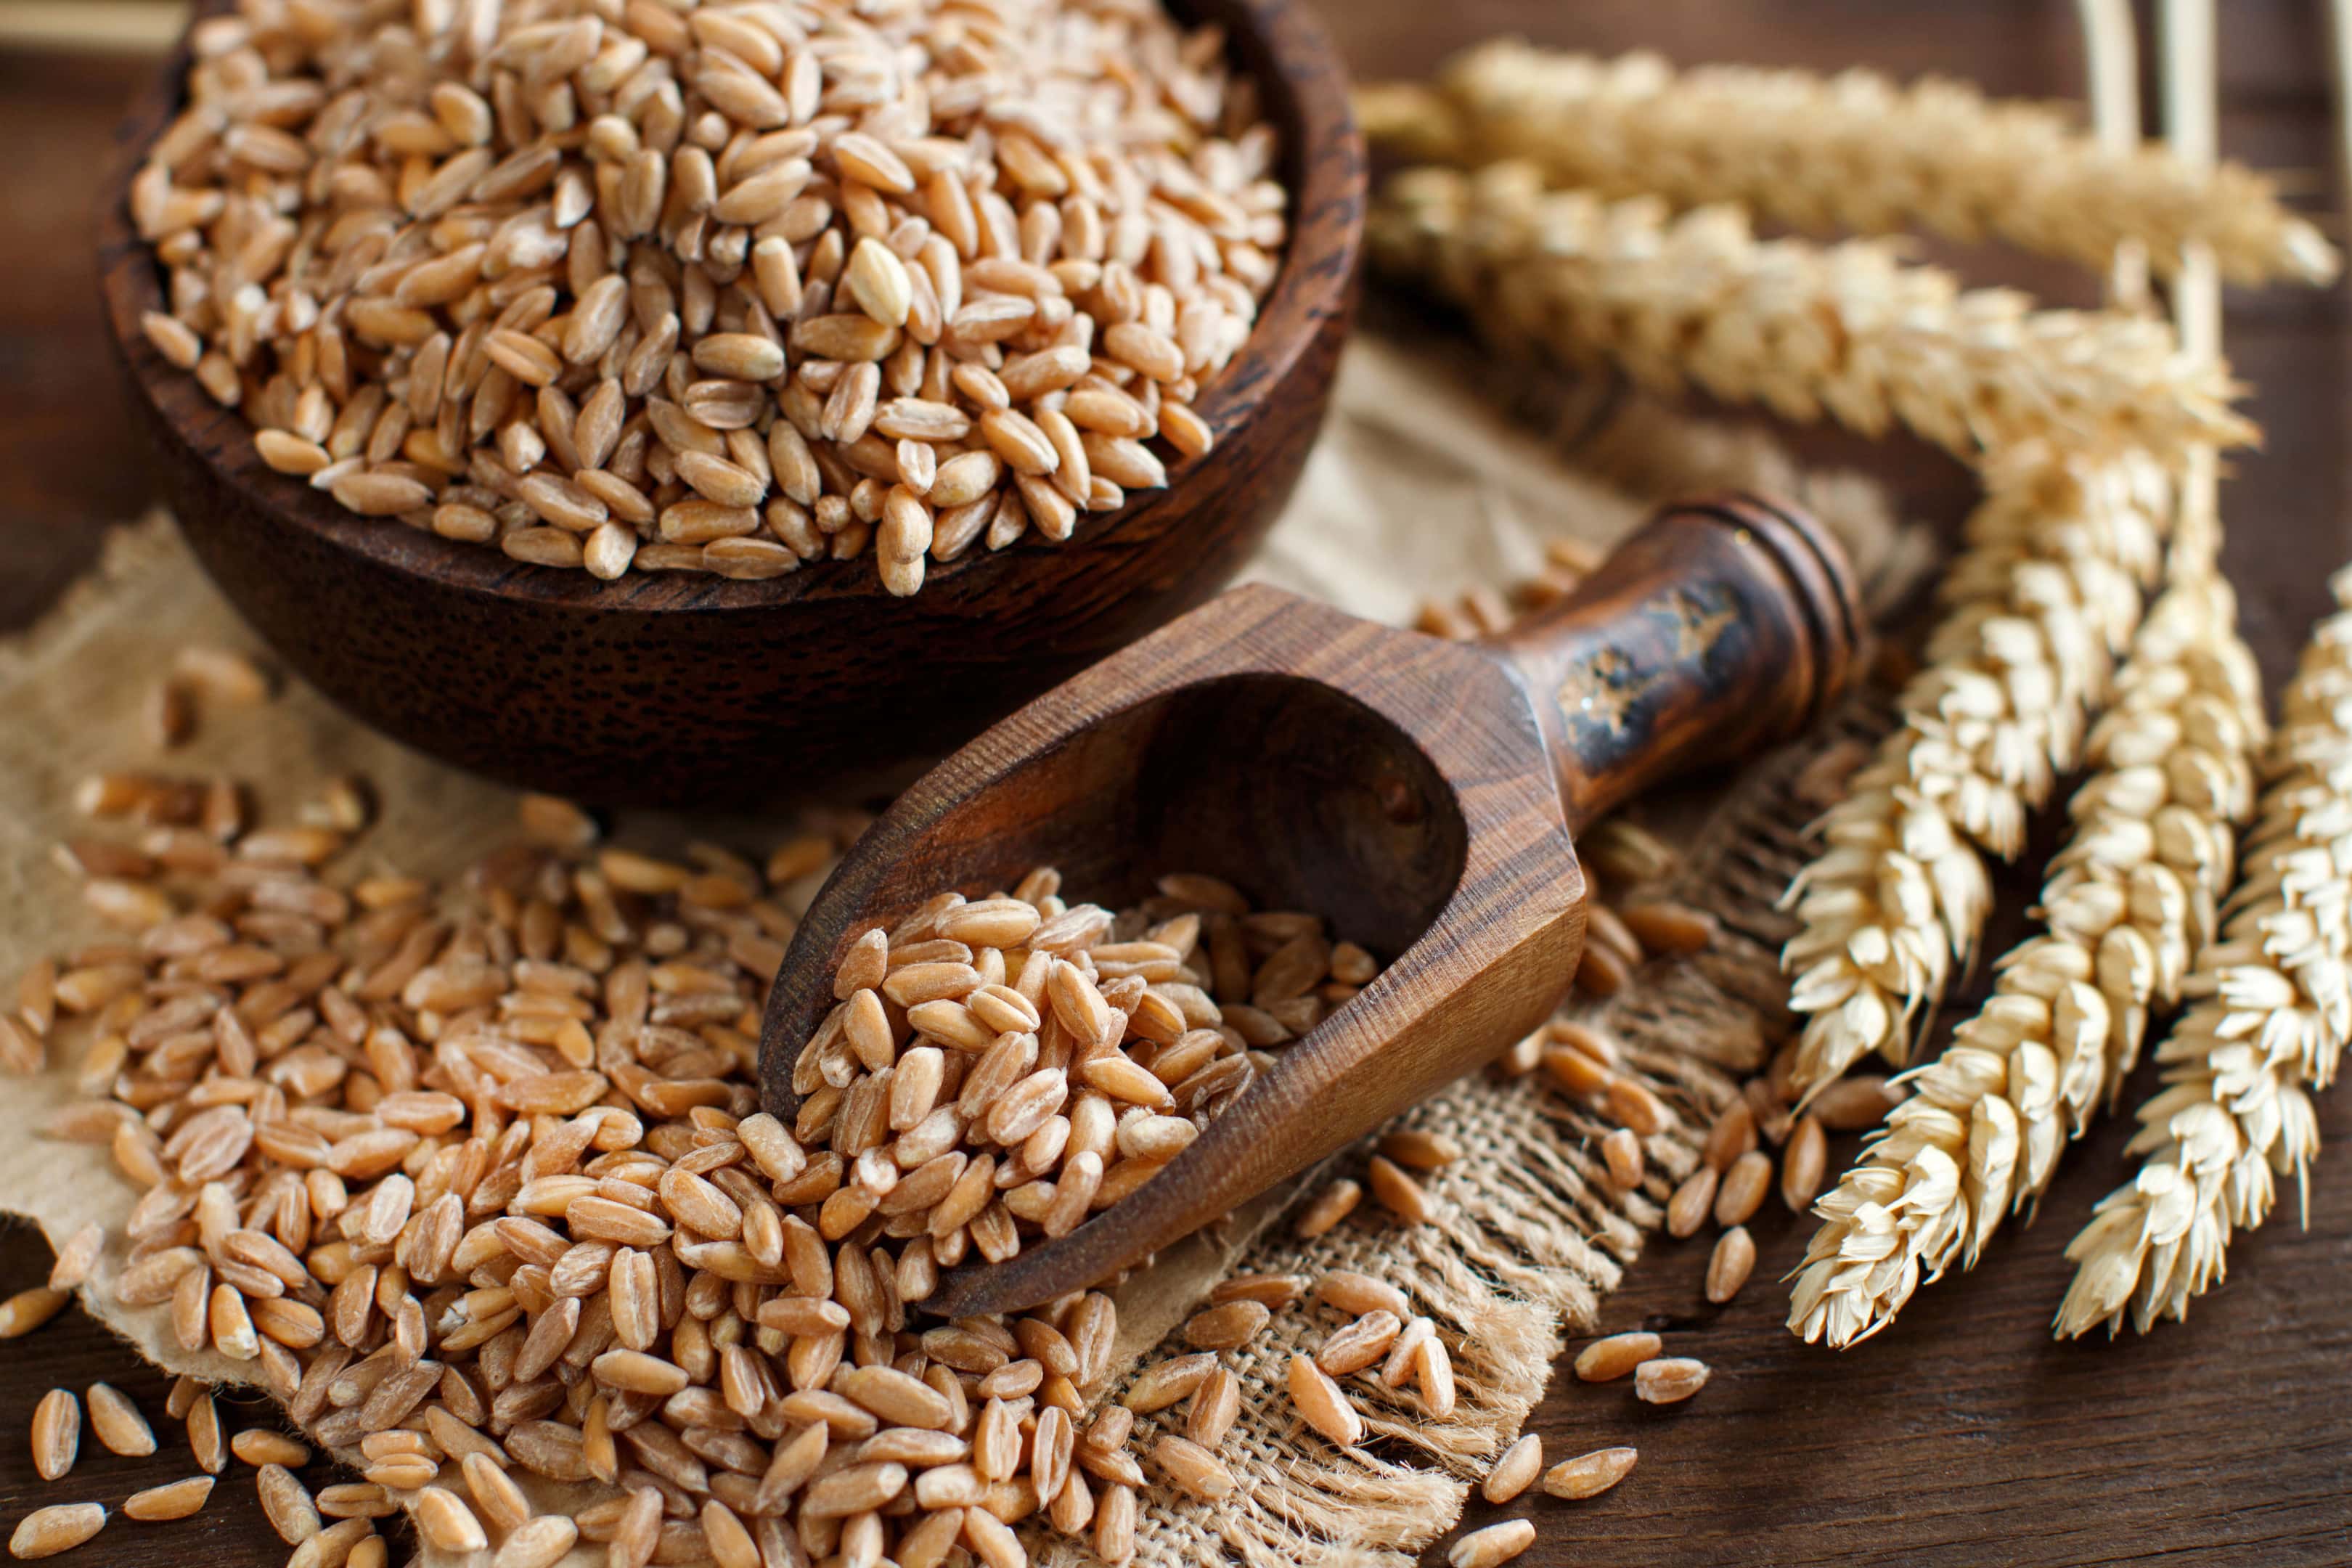 Fresh harvest whole grain. Grains is one of our list of foods for A-negative blood type diet.